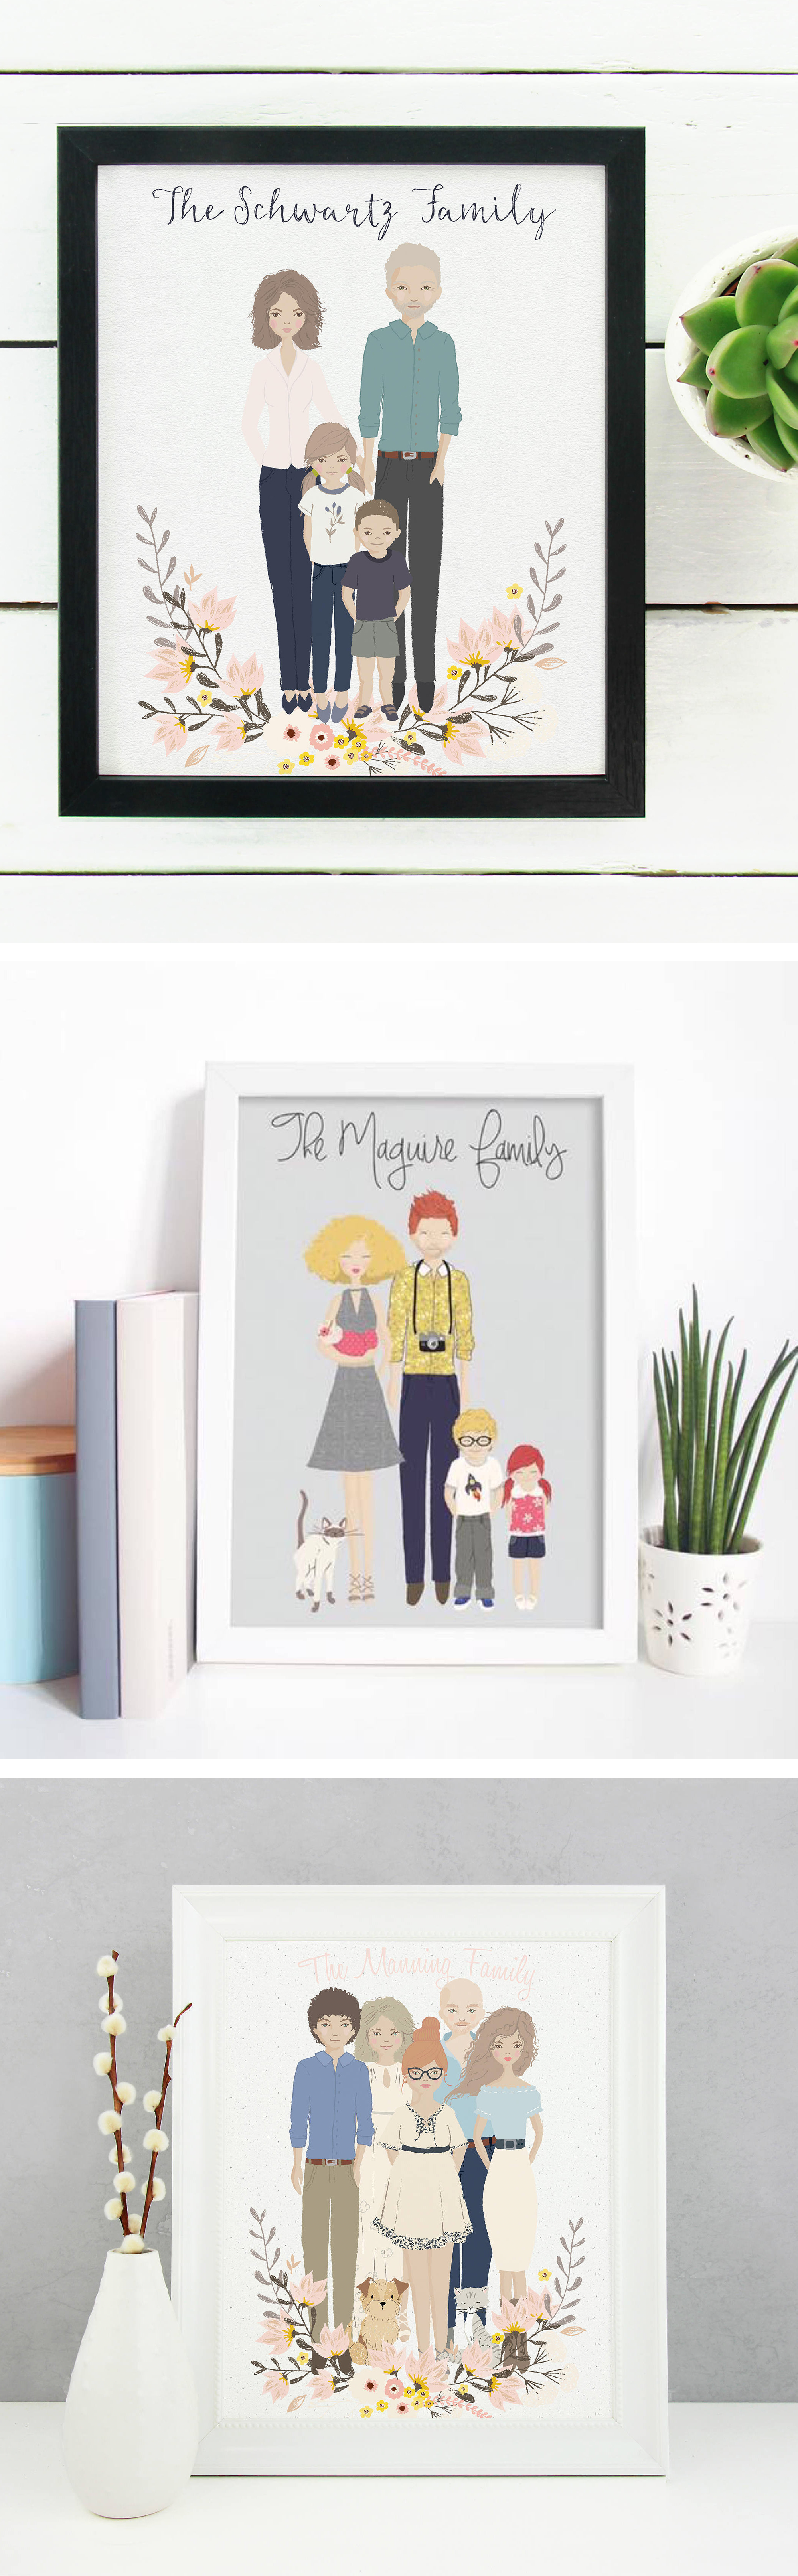 Custom Personalised Illustrated Family Portrait for a Mother’s Day present | Charlie and Mum on Etsy